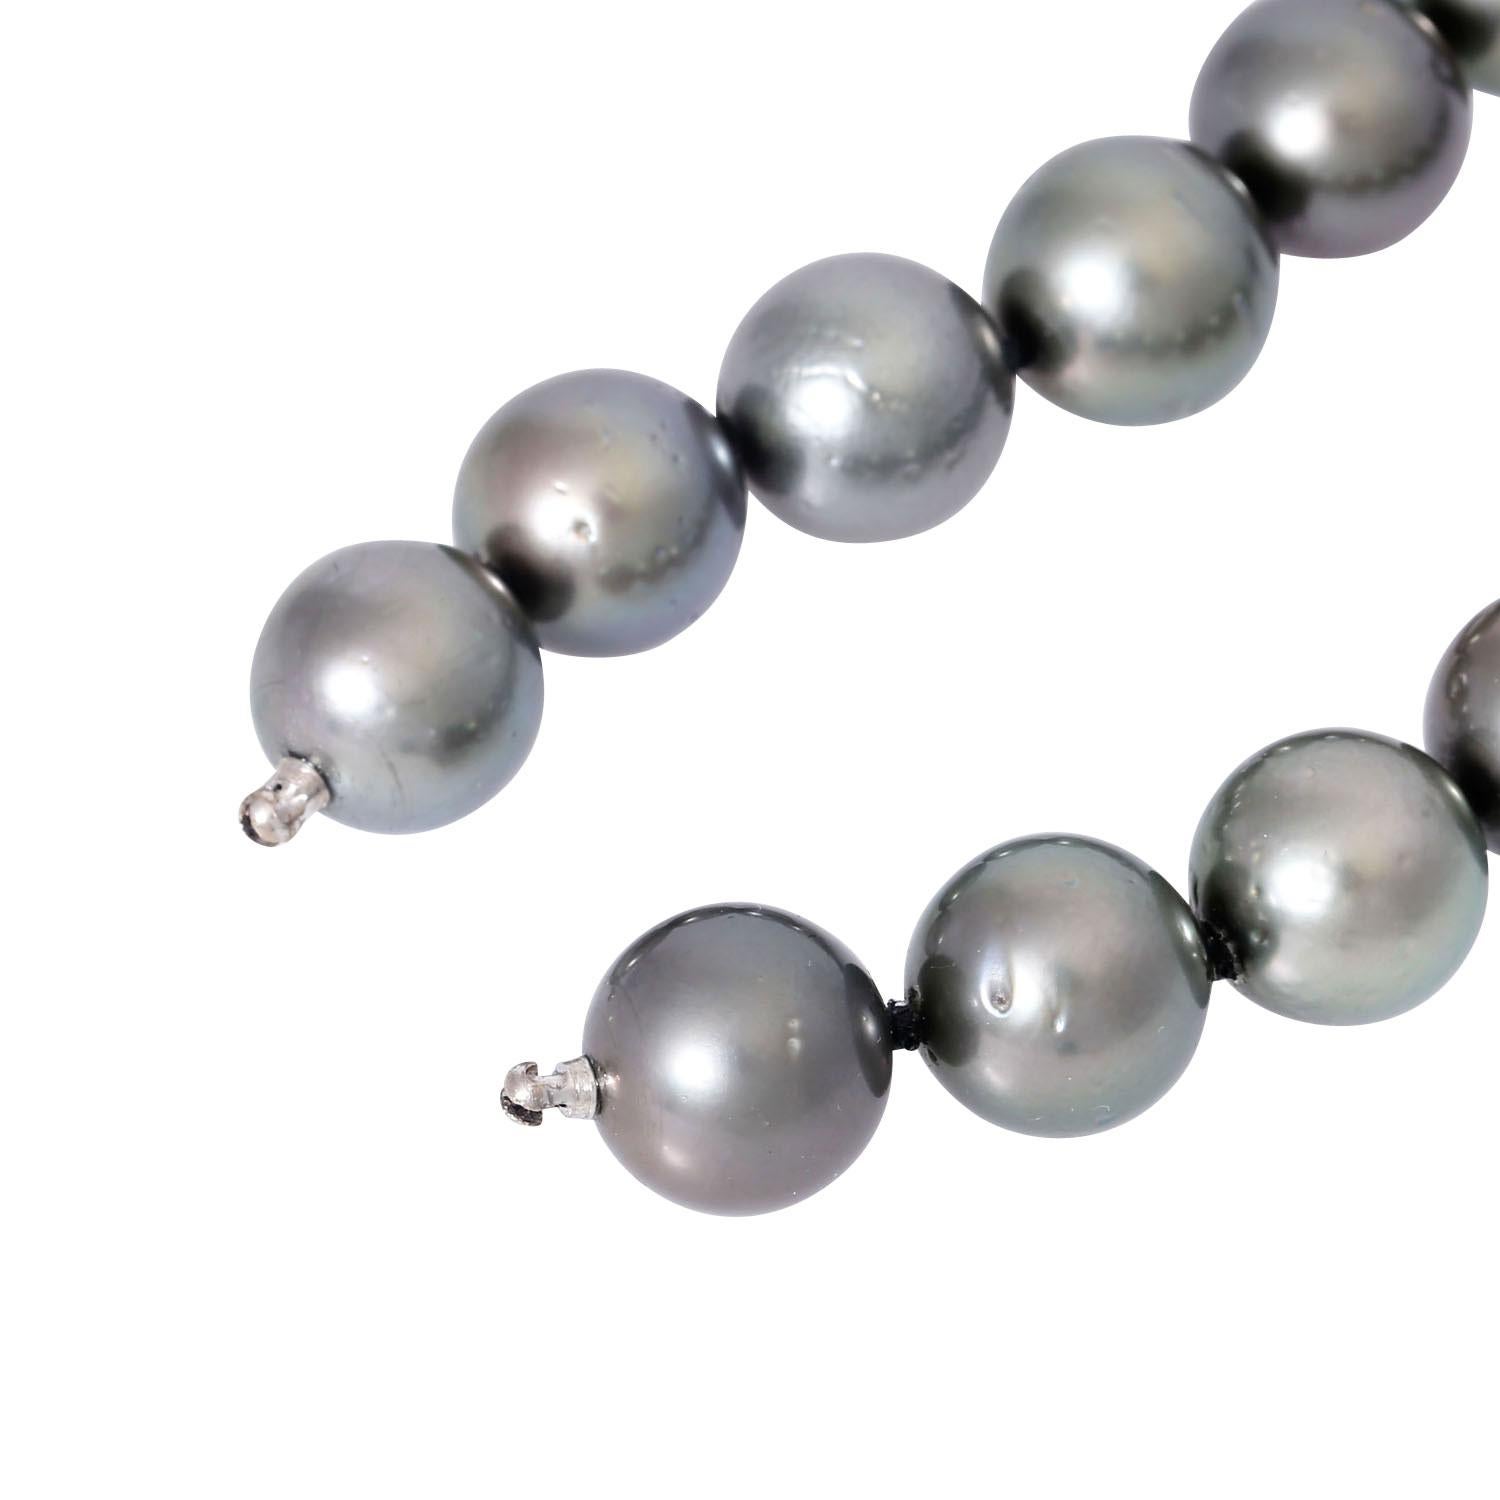 Uncut Fine Tahitian Pearl Necklace For Sale